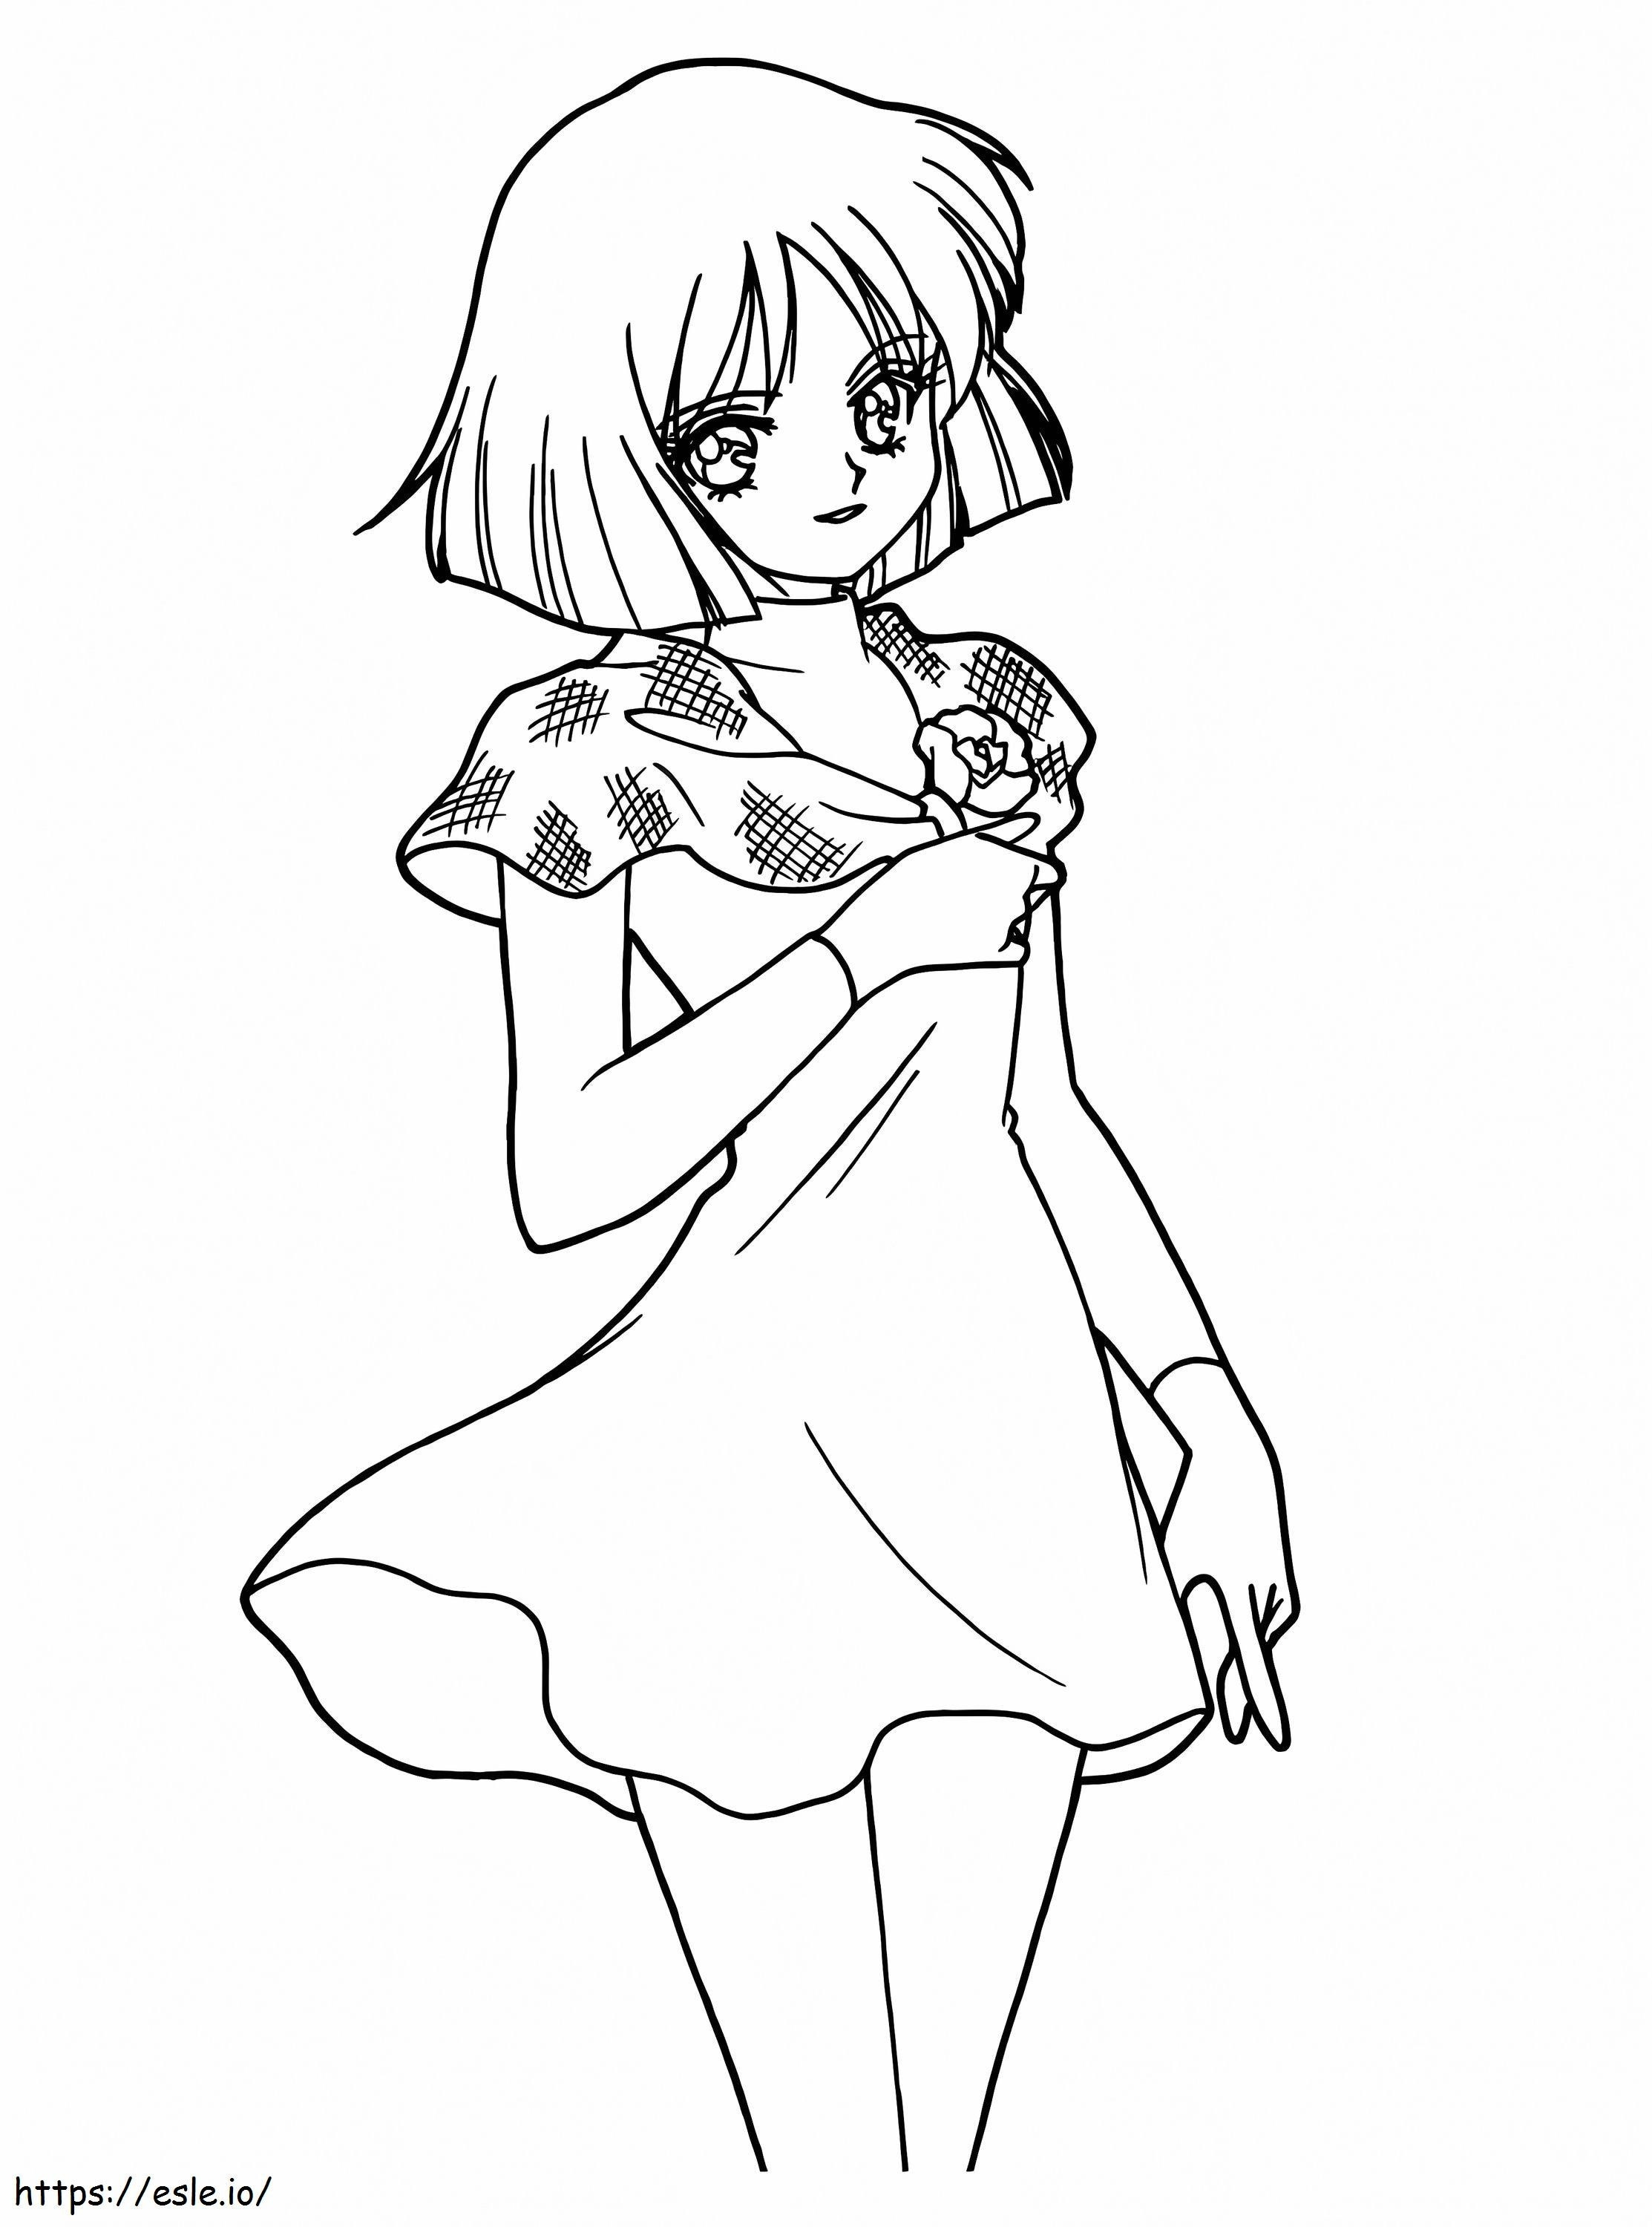 Sailor Saturn coloring page